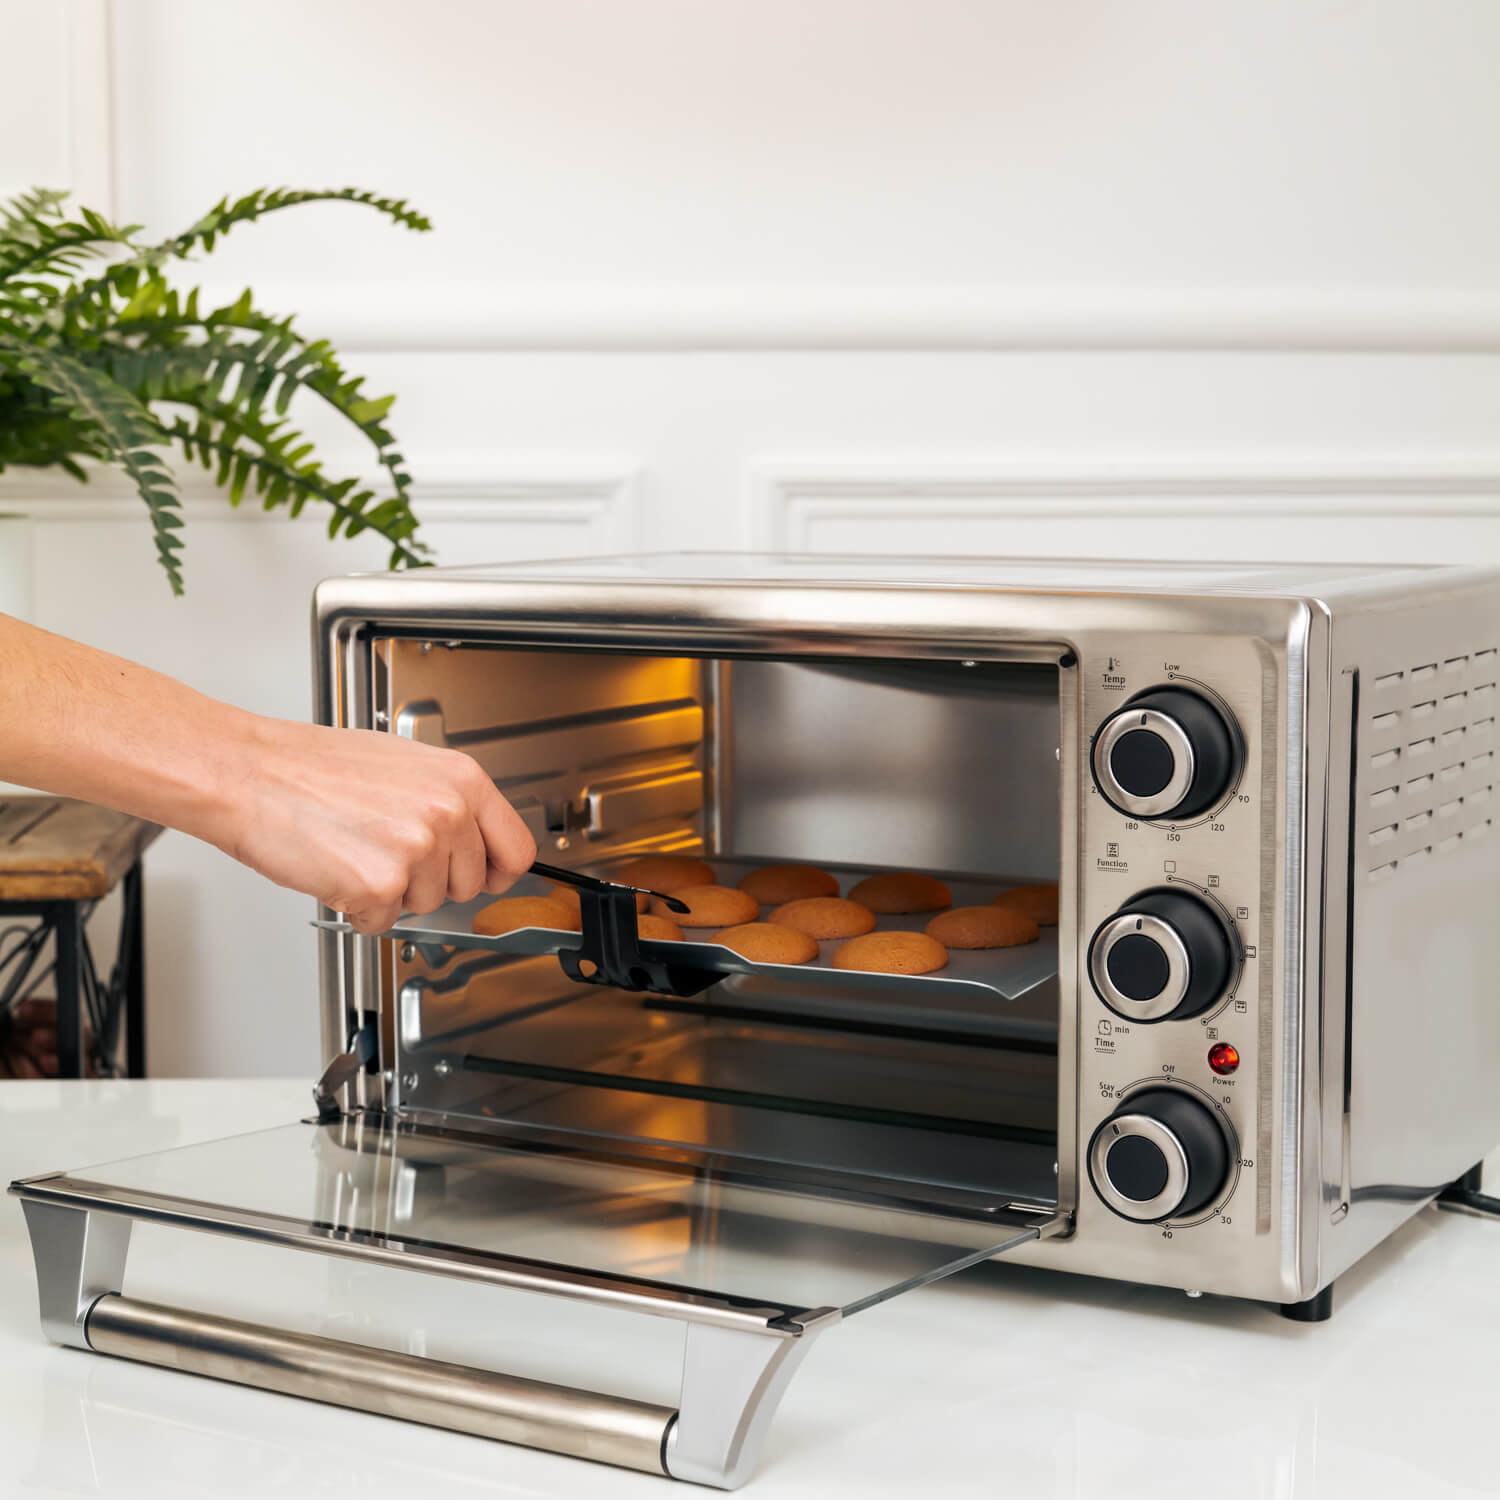 Osmon OTG Oven showcases Baking feature by baked a cookies